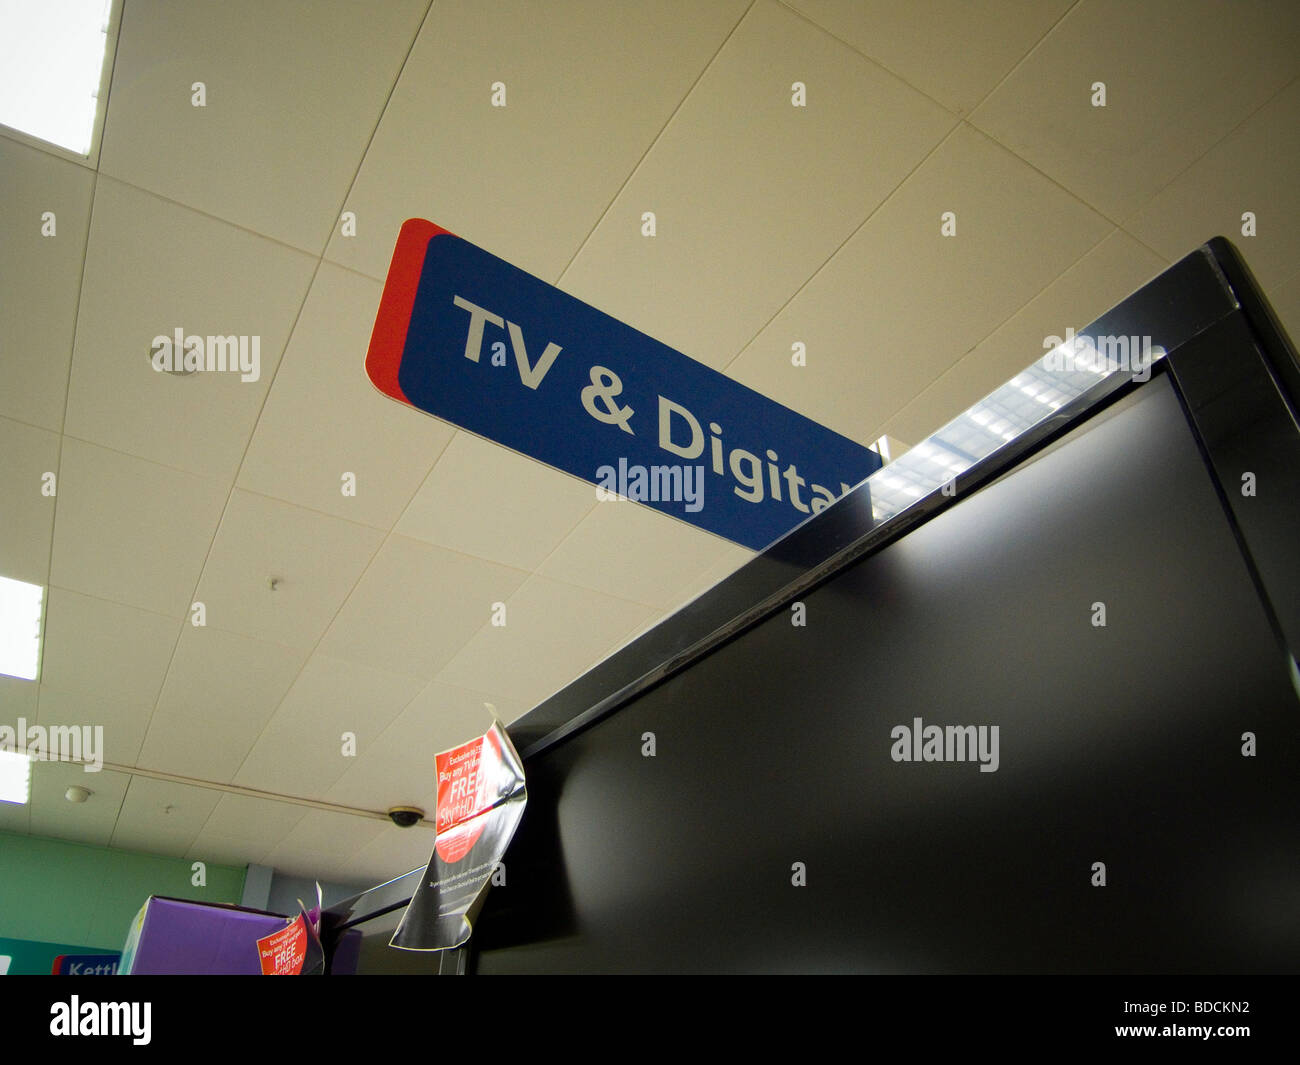 An Isle sign in a store - TV & Digital Stock Photo